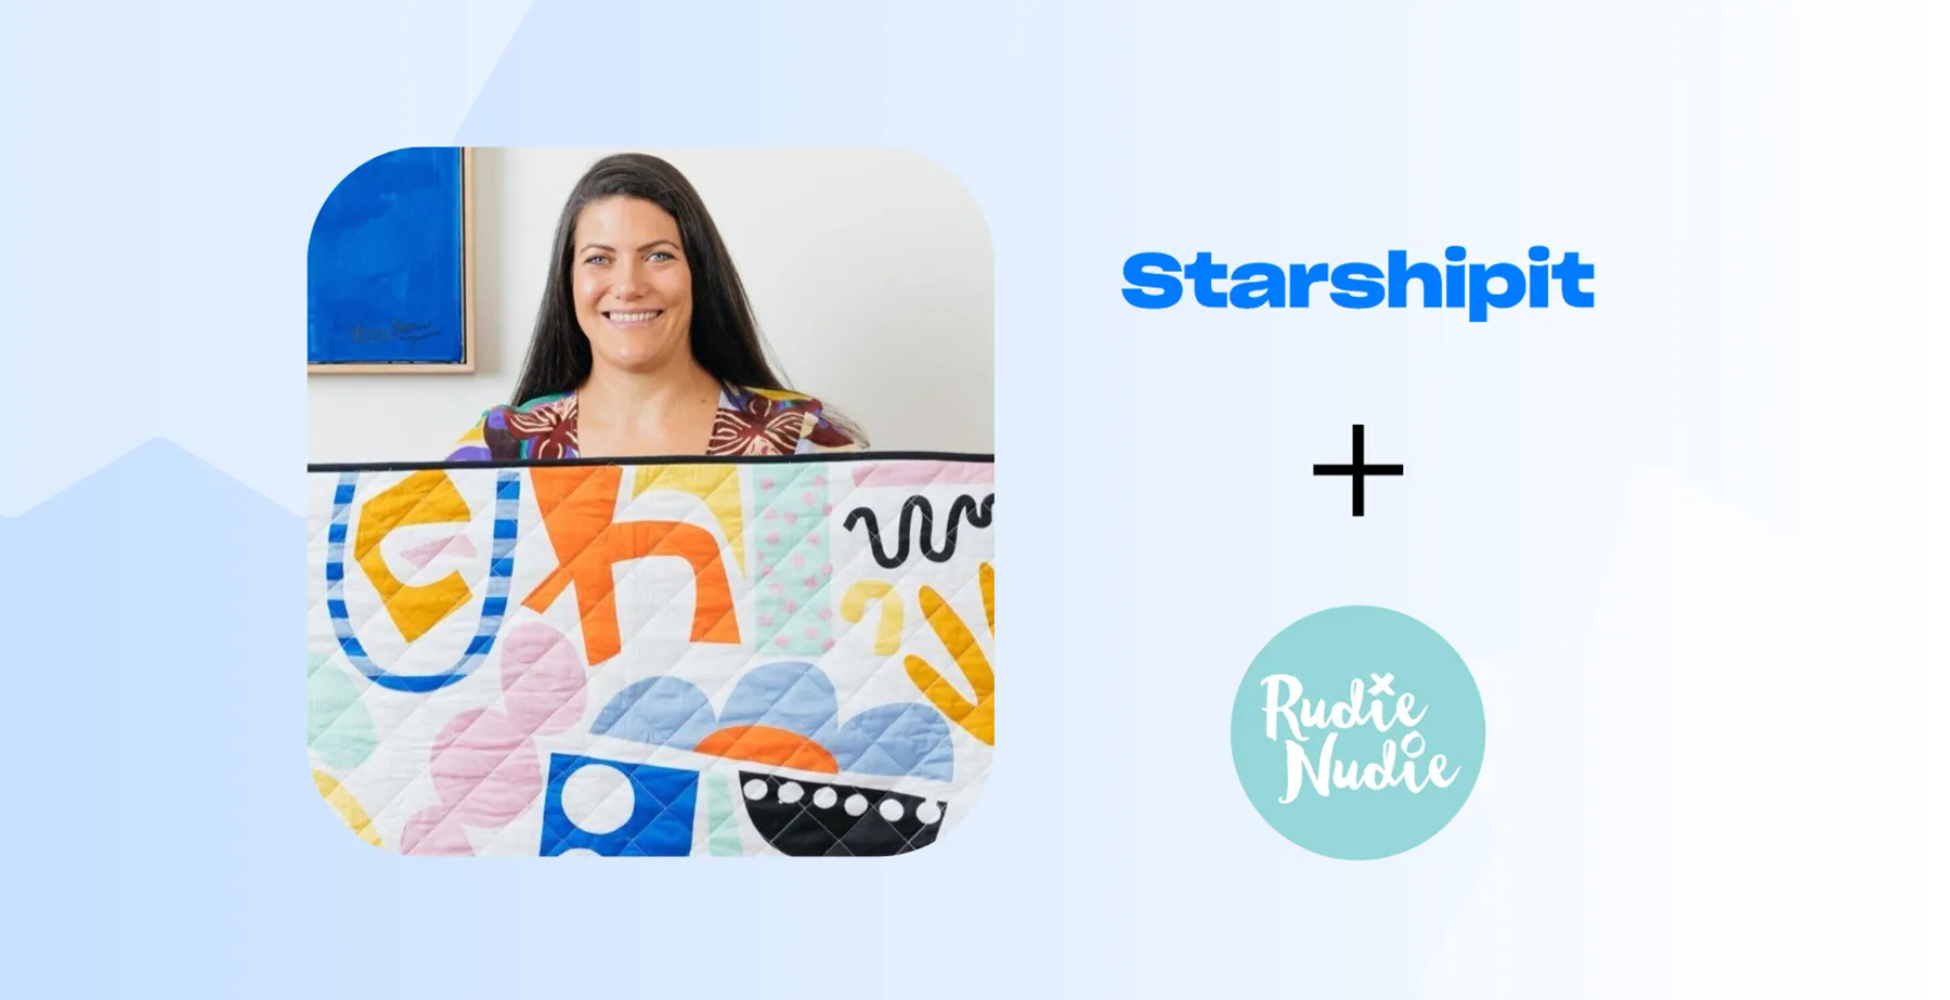 Starshipit and Rudie Nudie case study